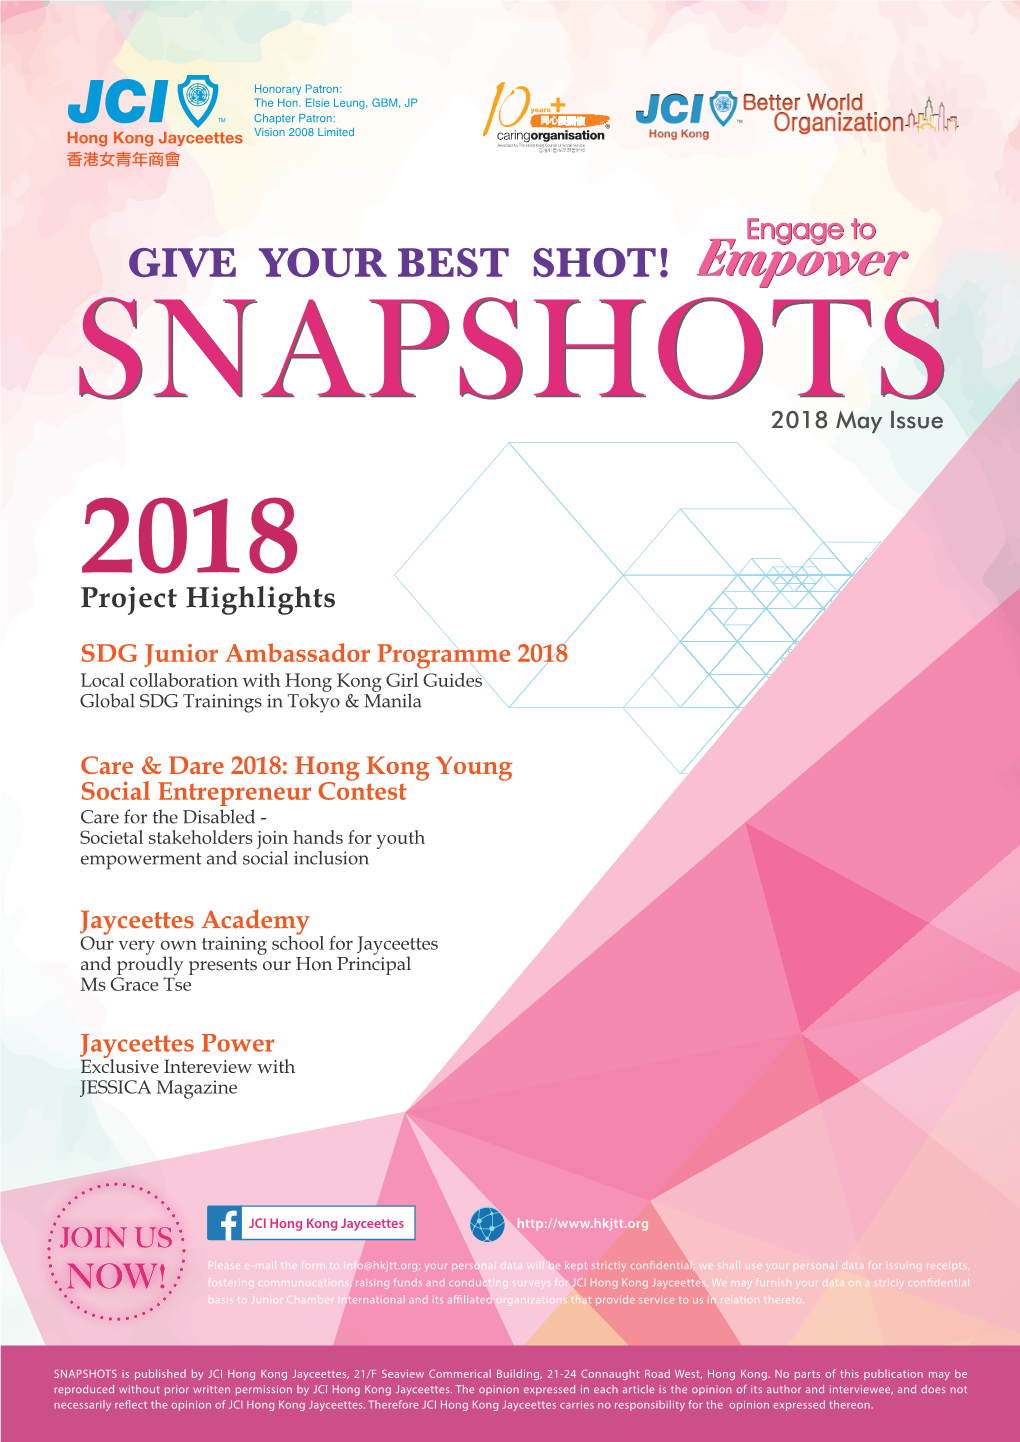 GIVE YOUR BEST SHOT! SNAPSHOTS SNAPSHOTS2018 May Issue 2018 Project Highlights